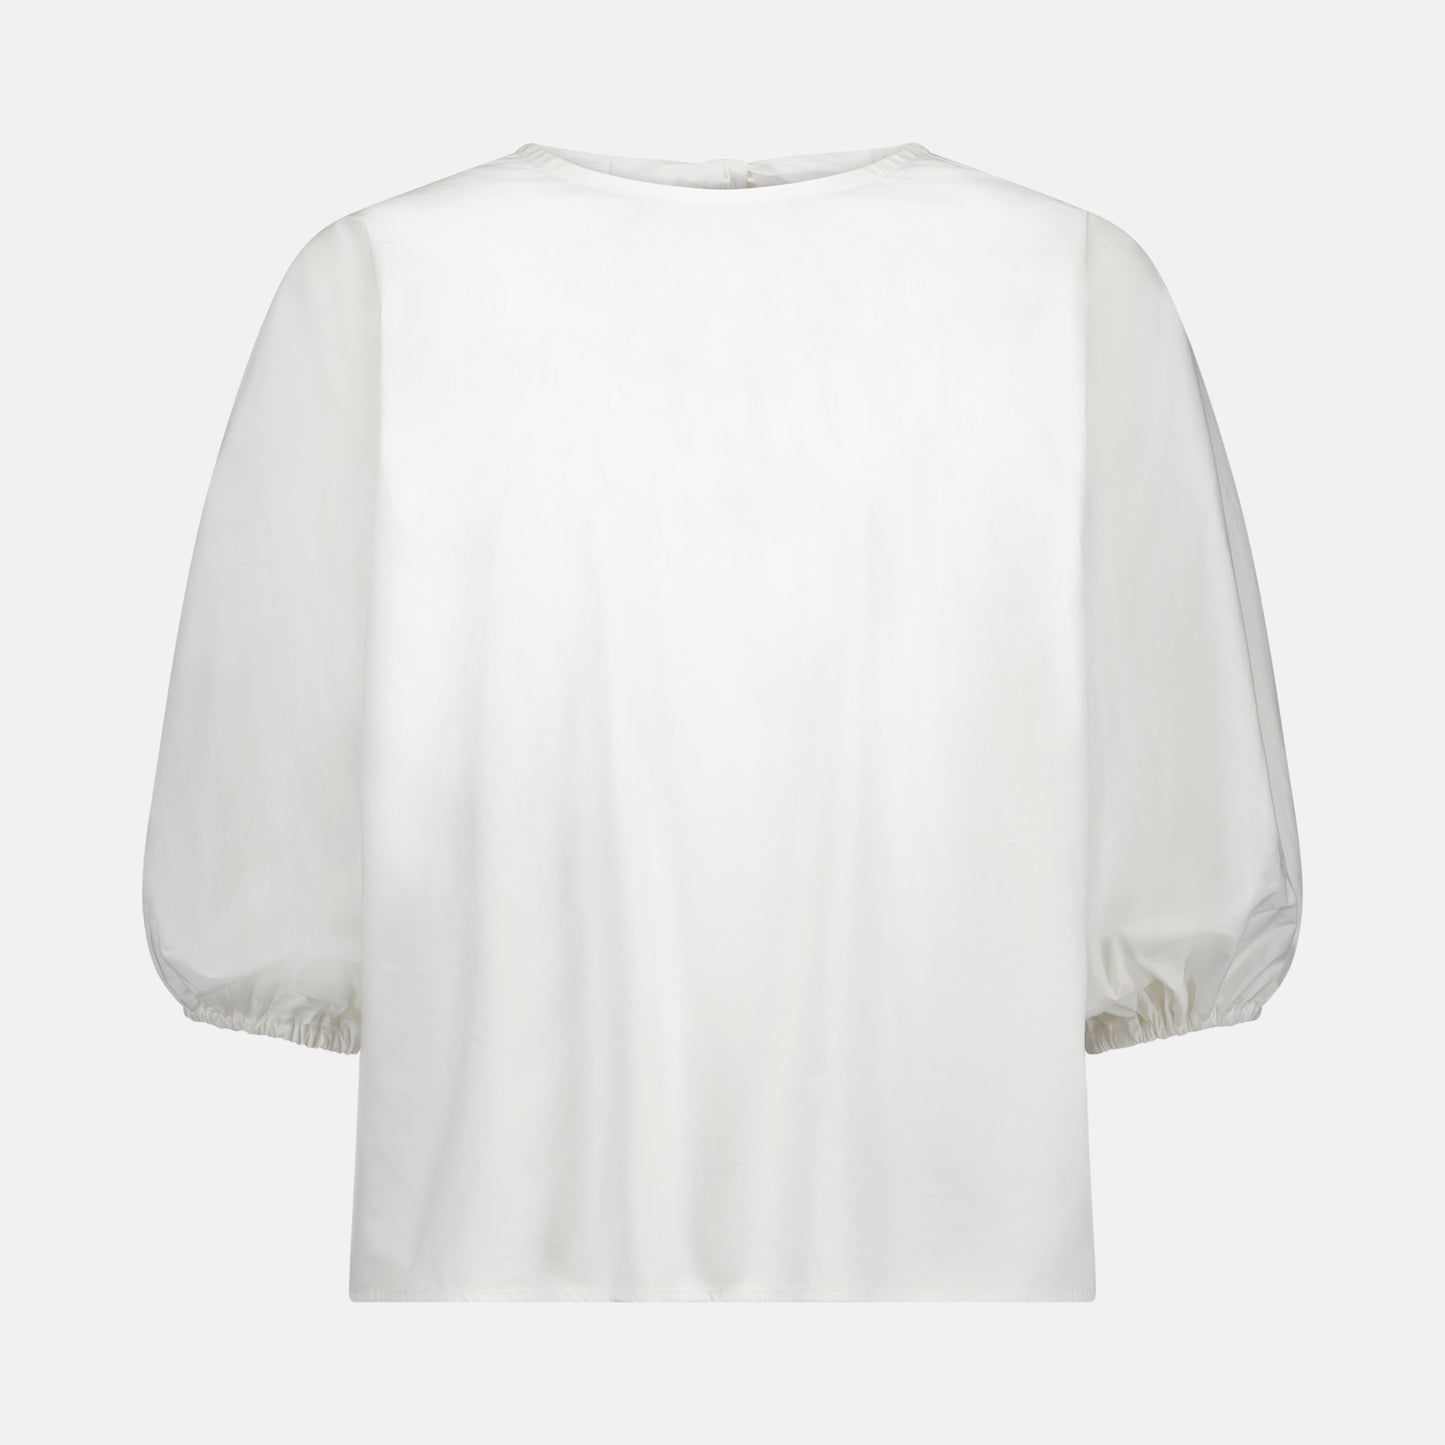 Jarvis Top - White